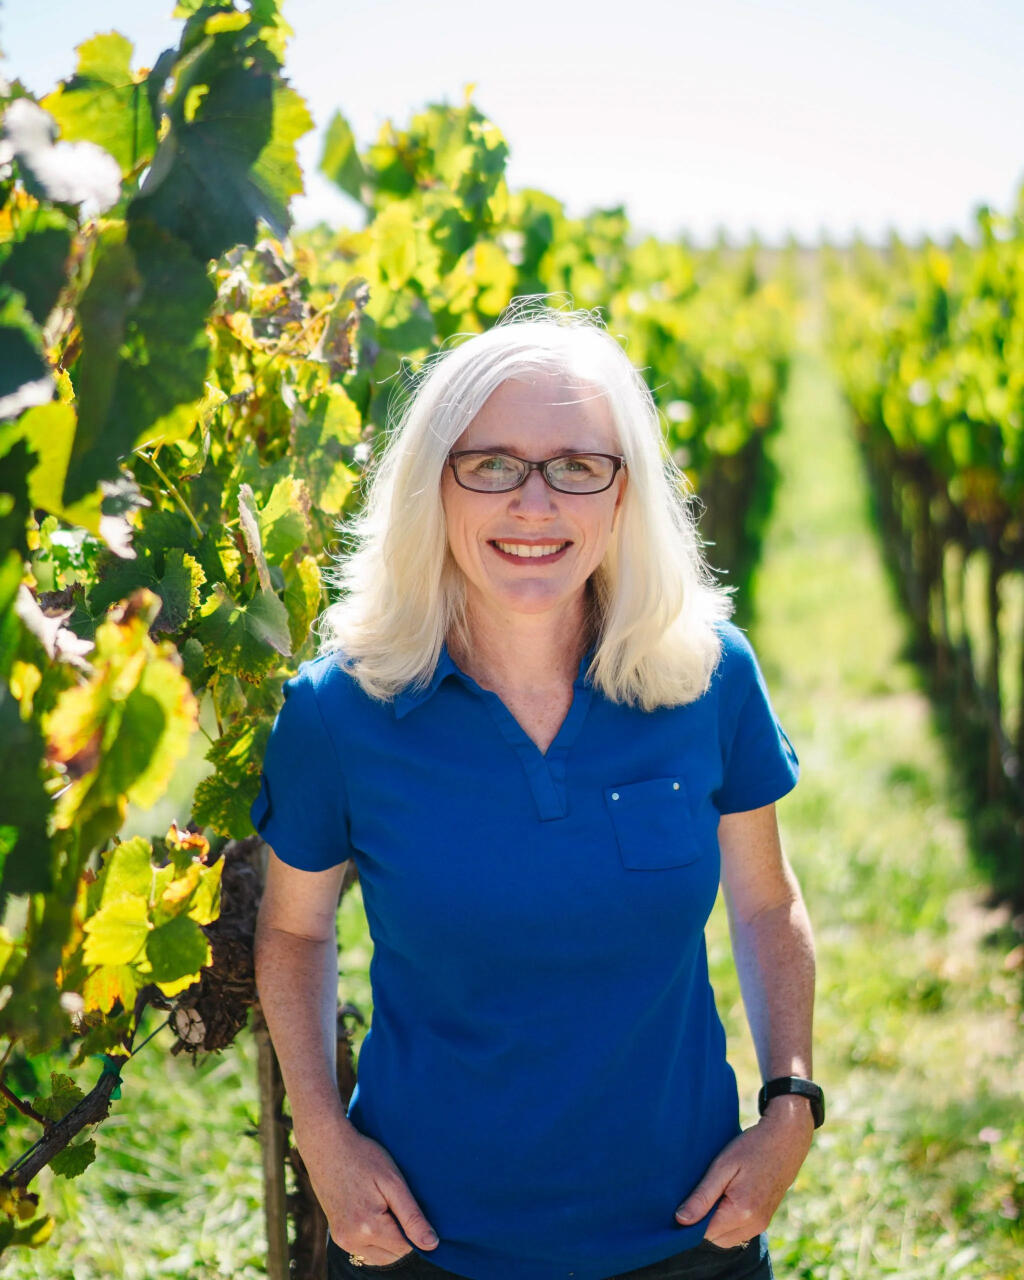 Cara Morrison is promoted to director of winemaking at Windsor’s Sonoma-Cutrer Vineyards in 2023. (Courtesy: Sonoma-Cutrer Vineyards)